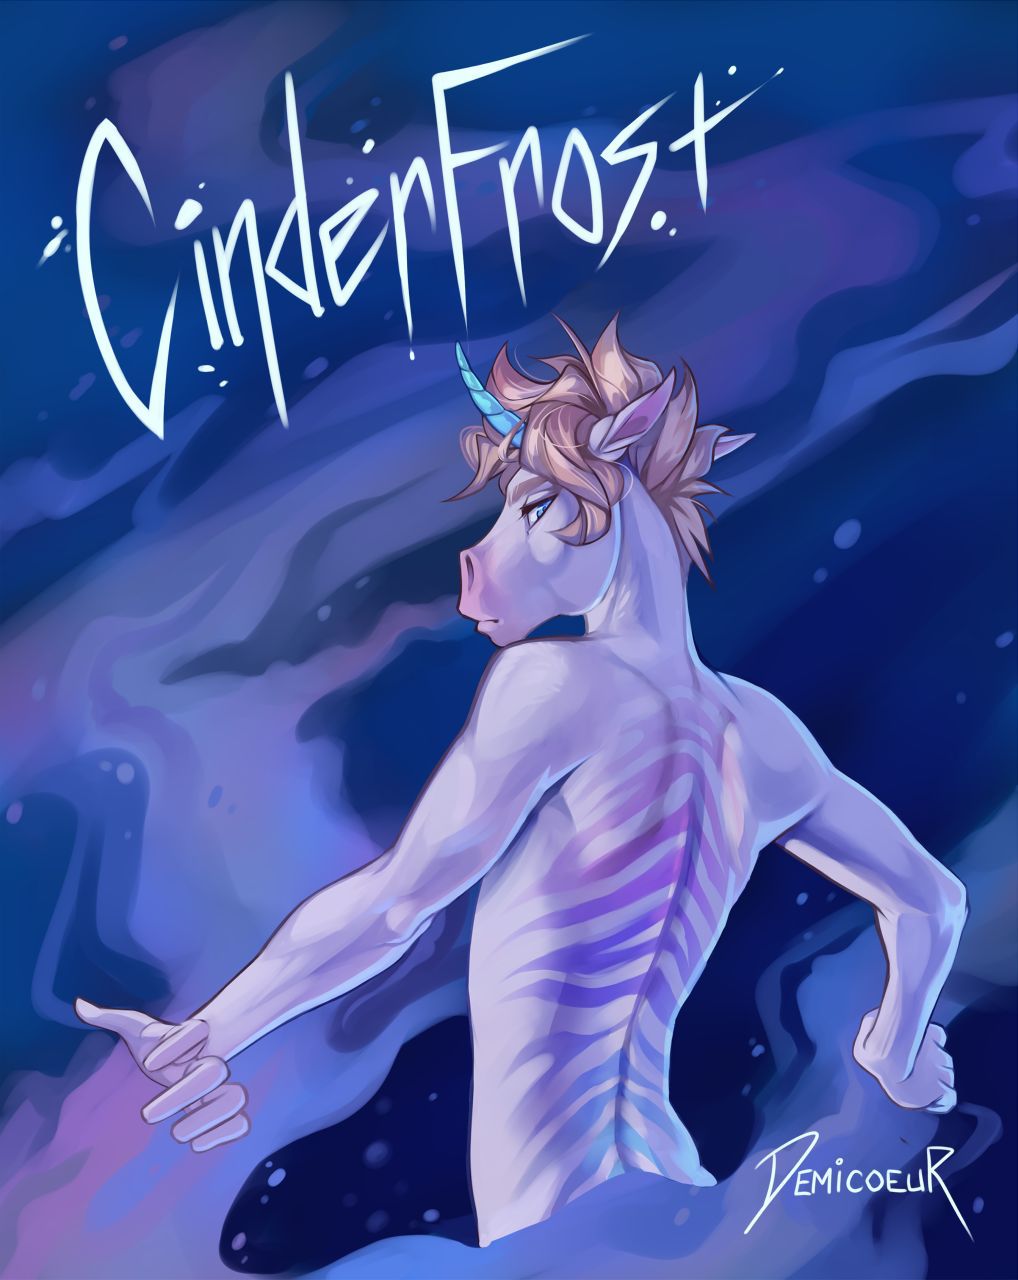 [Demicoeur] CinderFrost (Ongoing) 44